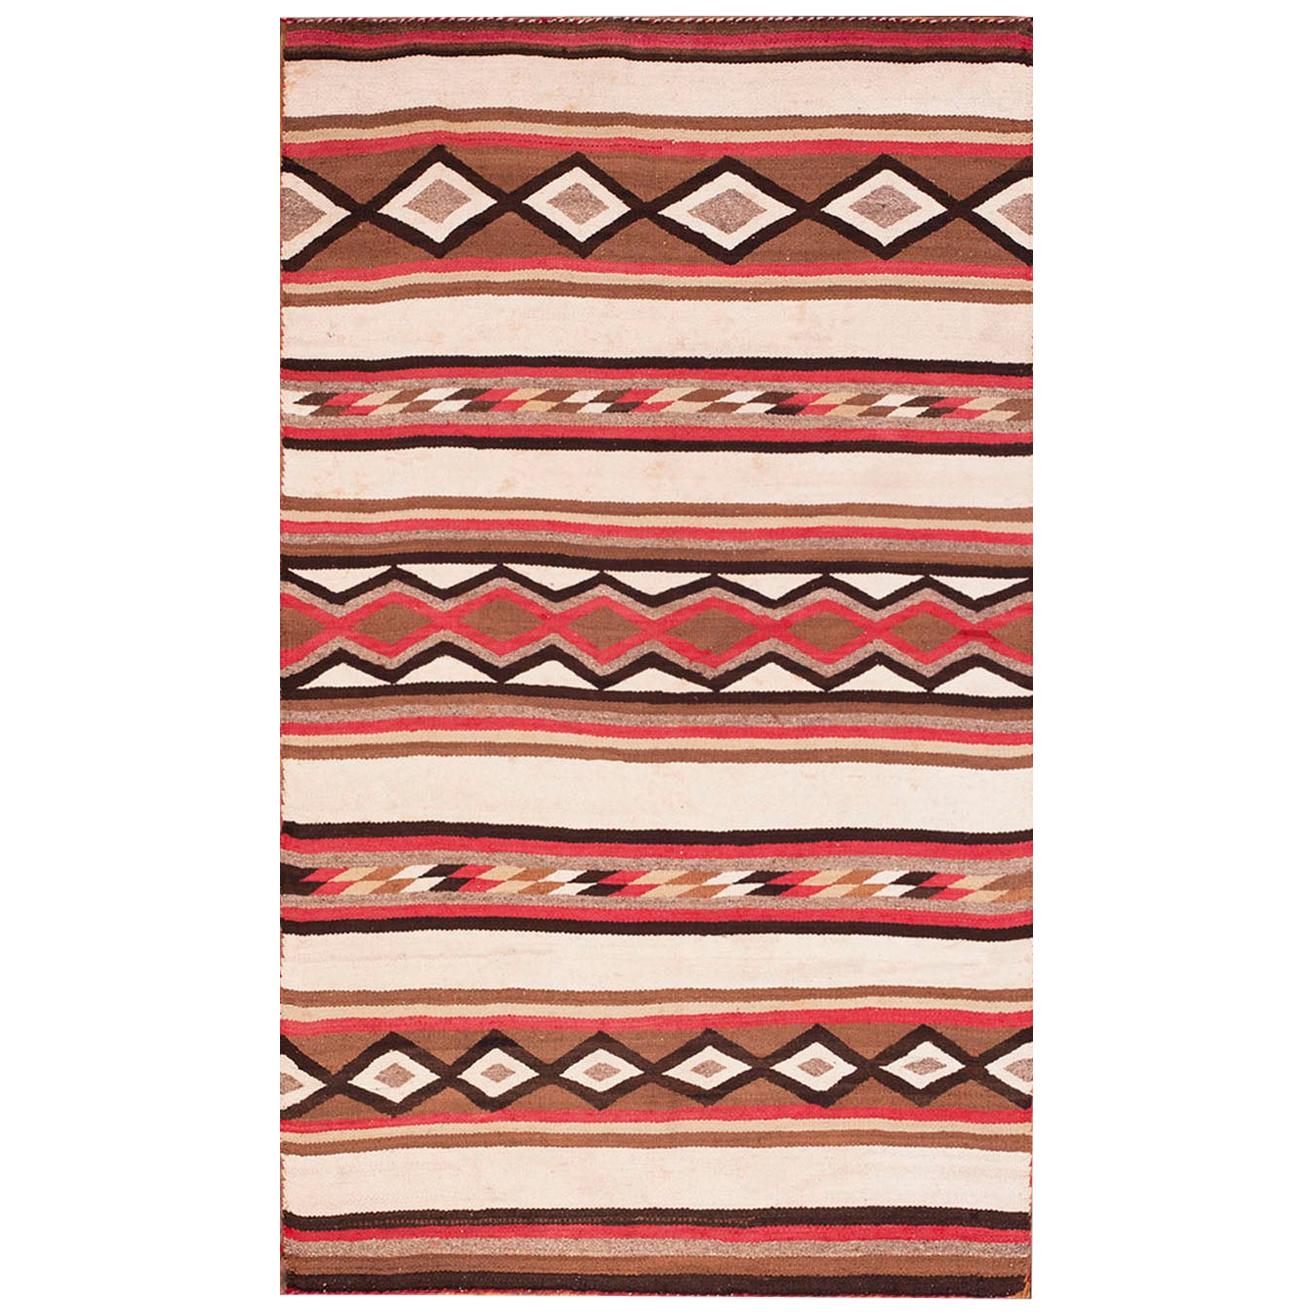 Early 20th Century American Navajo Chinle Wide Ruins Carpet ( 3'6" x 5'9" )